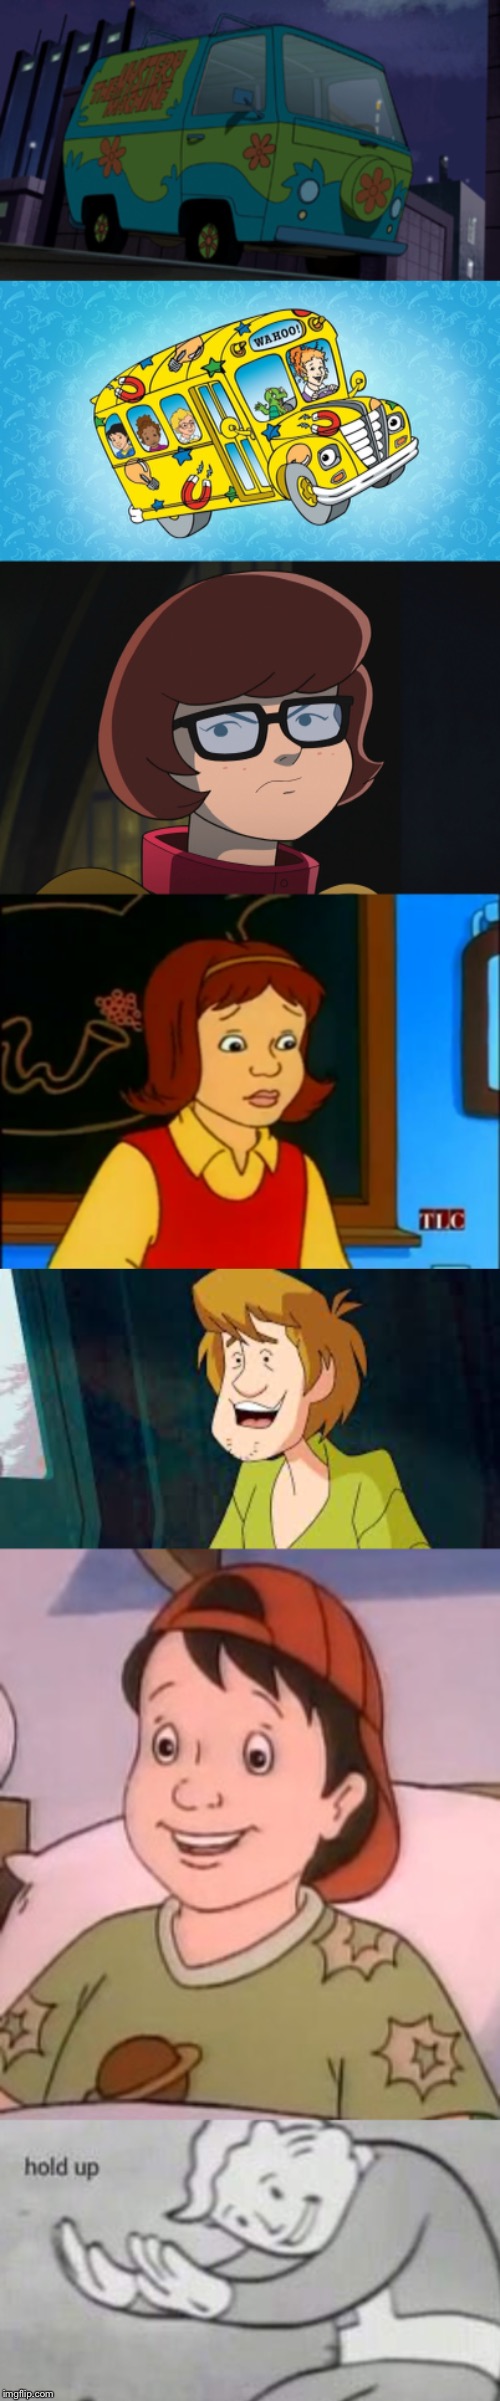 Magic School Bus is just educational Scooby Doo change my mind | image tagged in memes,scooby doo,magic school bus | made w/ Imgflip meme maker